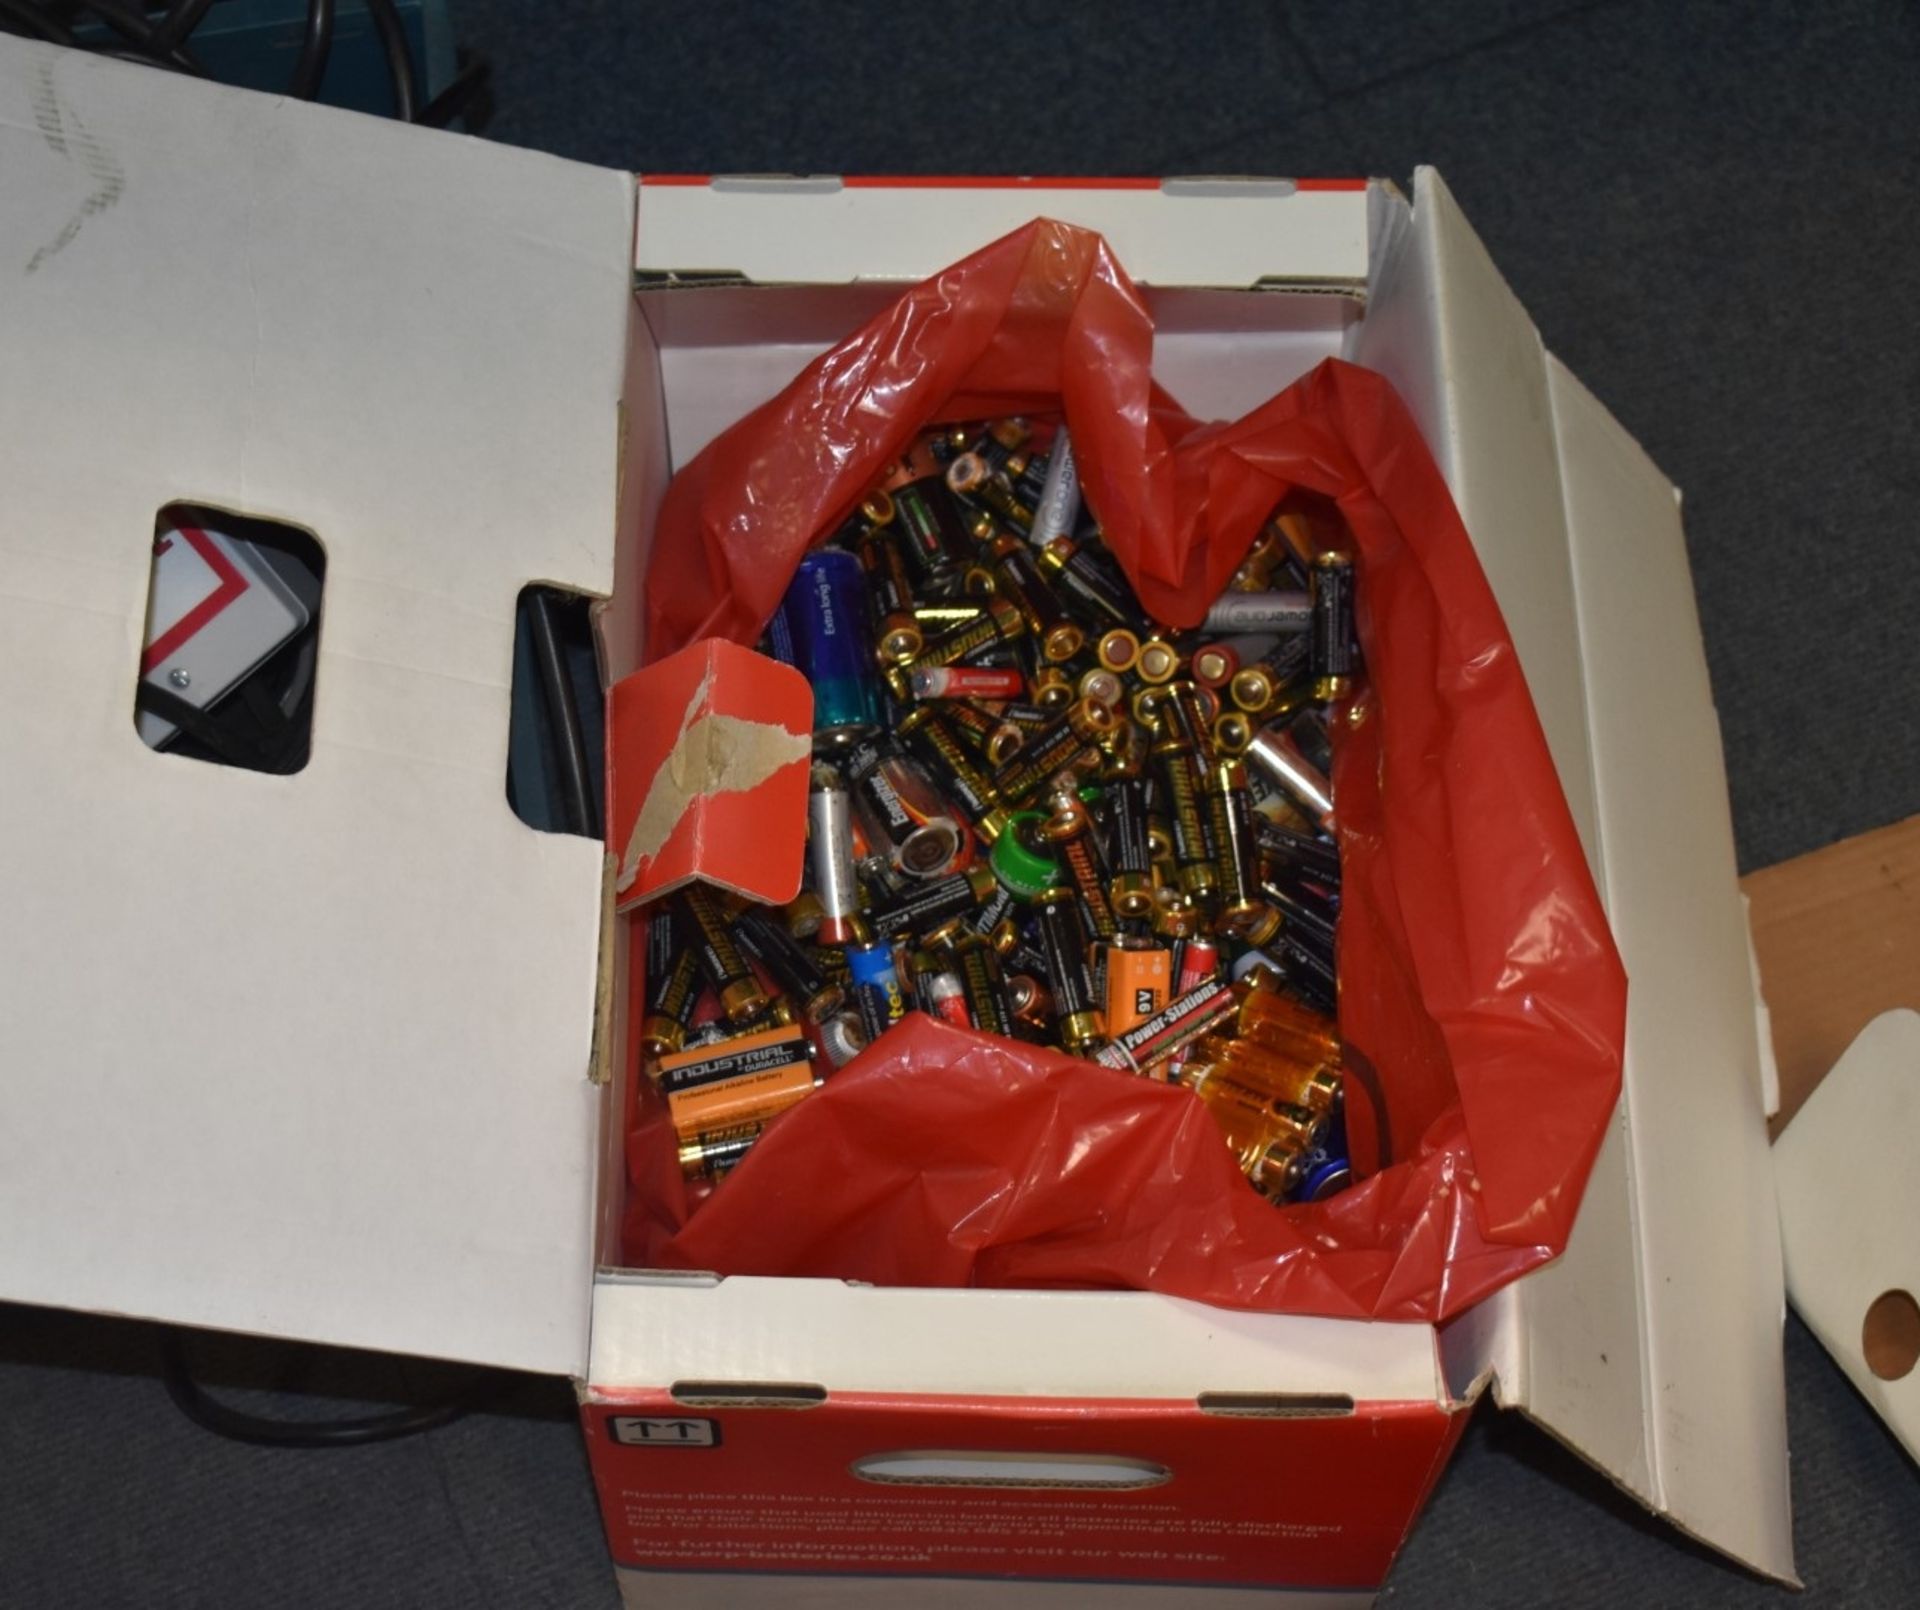 Assorted Job Lot - Includes Hard Hats, Workware, Cameras, Security Wand, Xmas Decorations, Office - Image 12 of 25